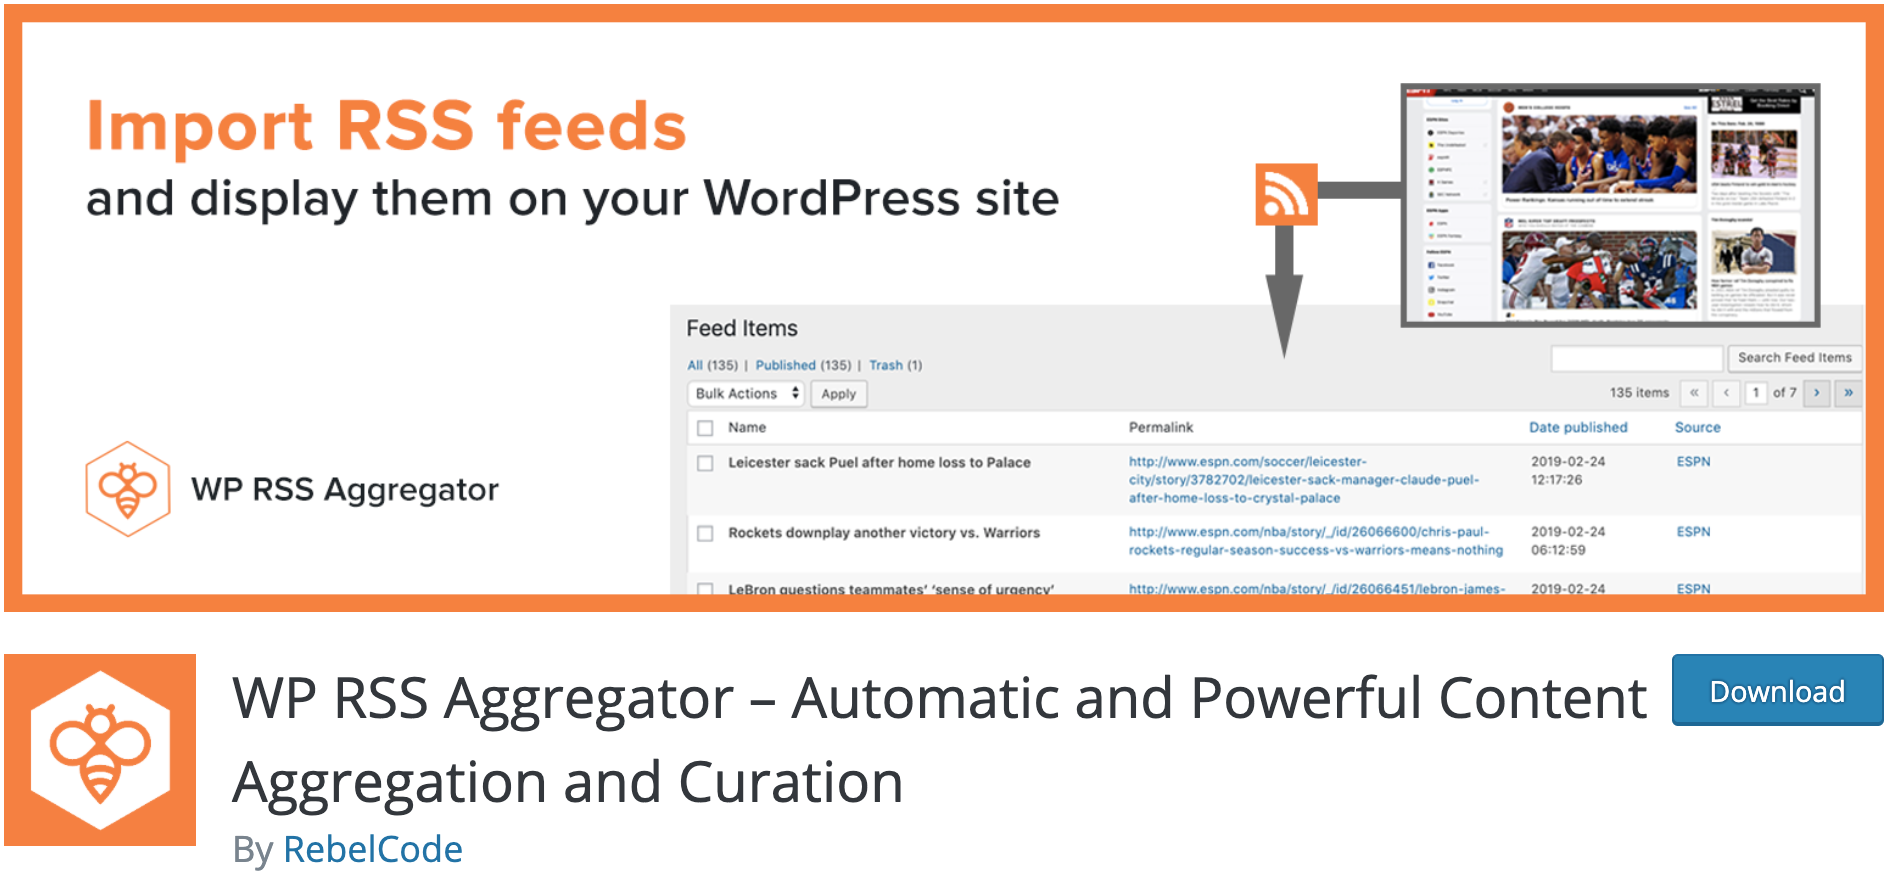 WP RSS Aggregator page to download the plugin